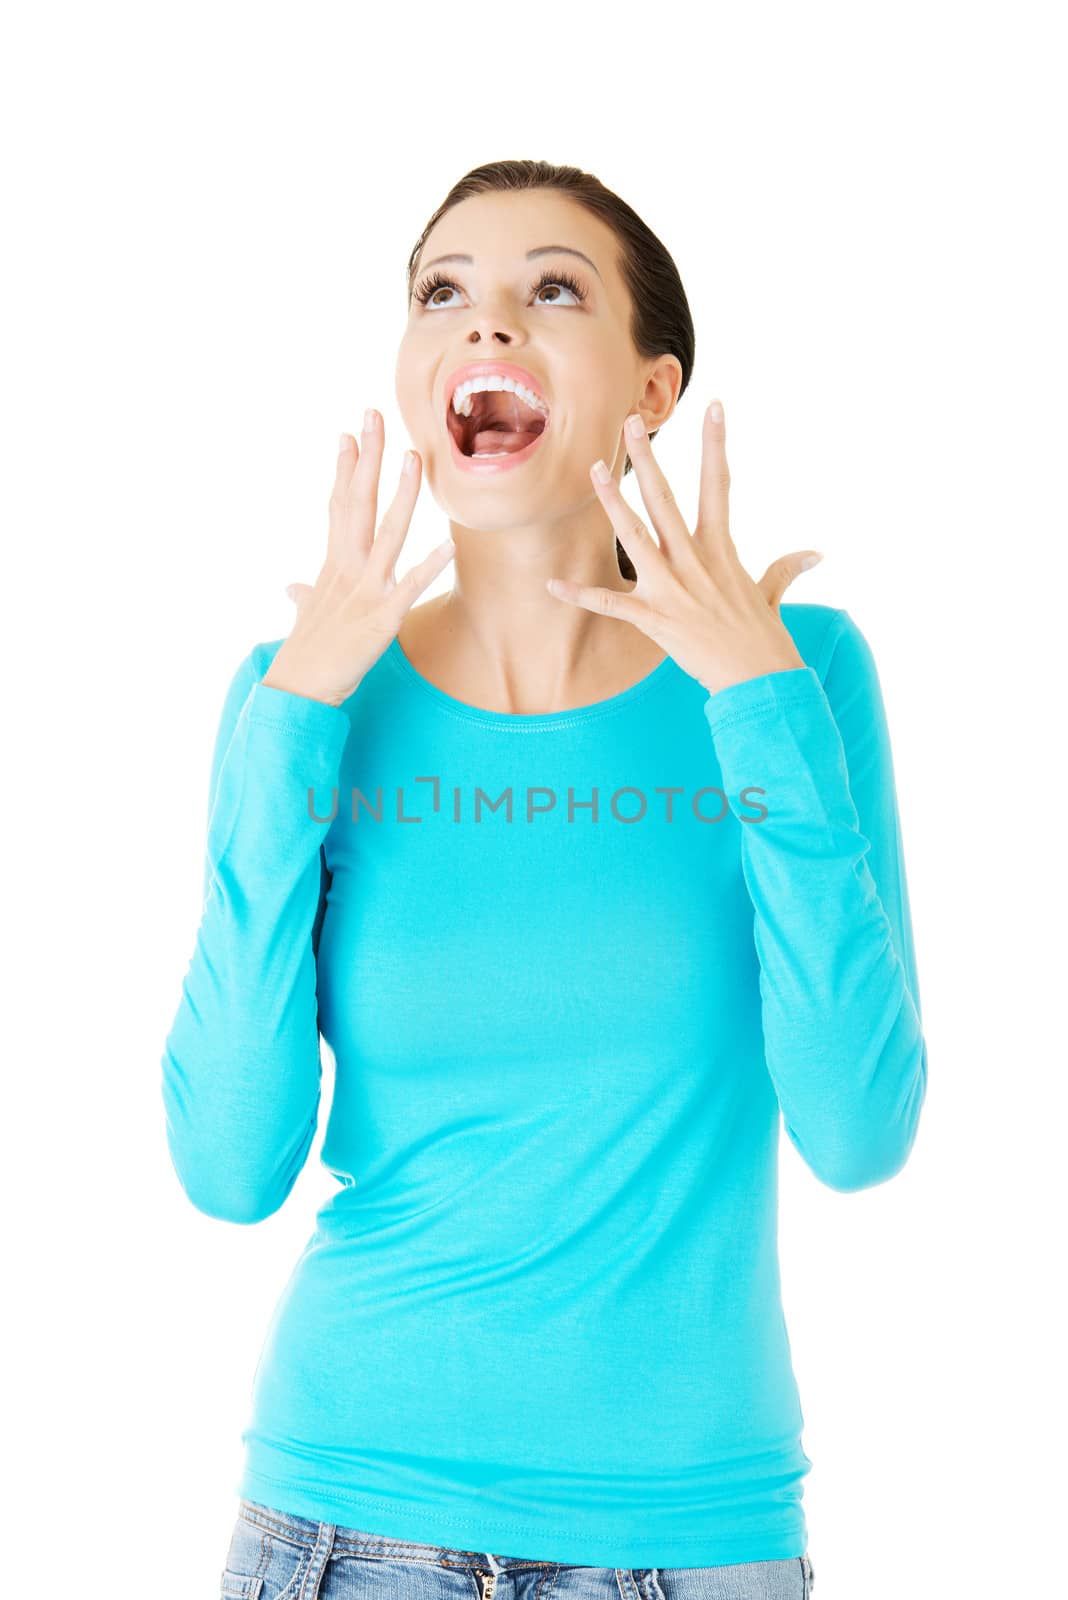 beautiful casual woman screaming, looking up. Isolated on white.